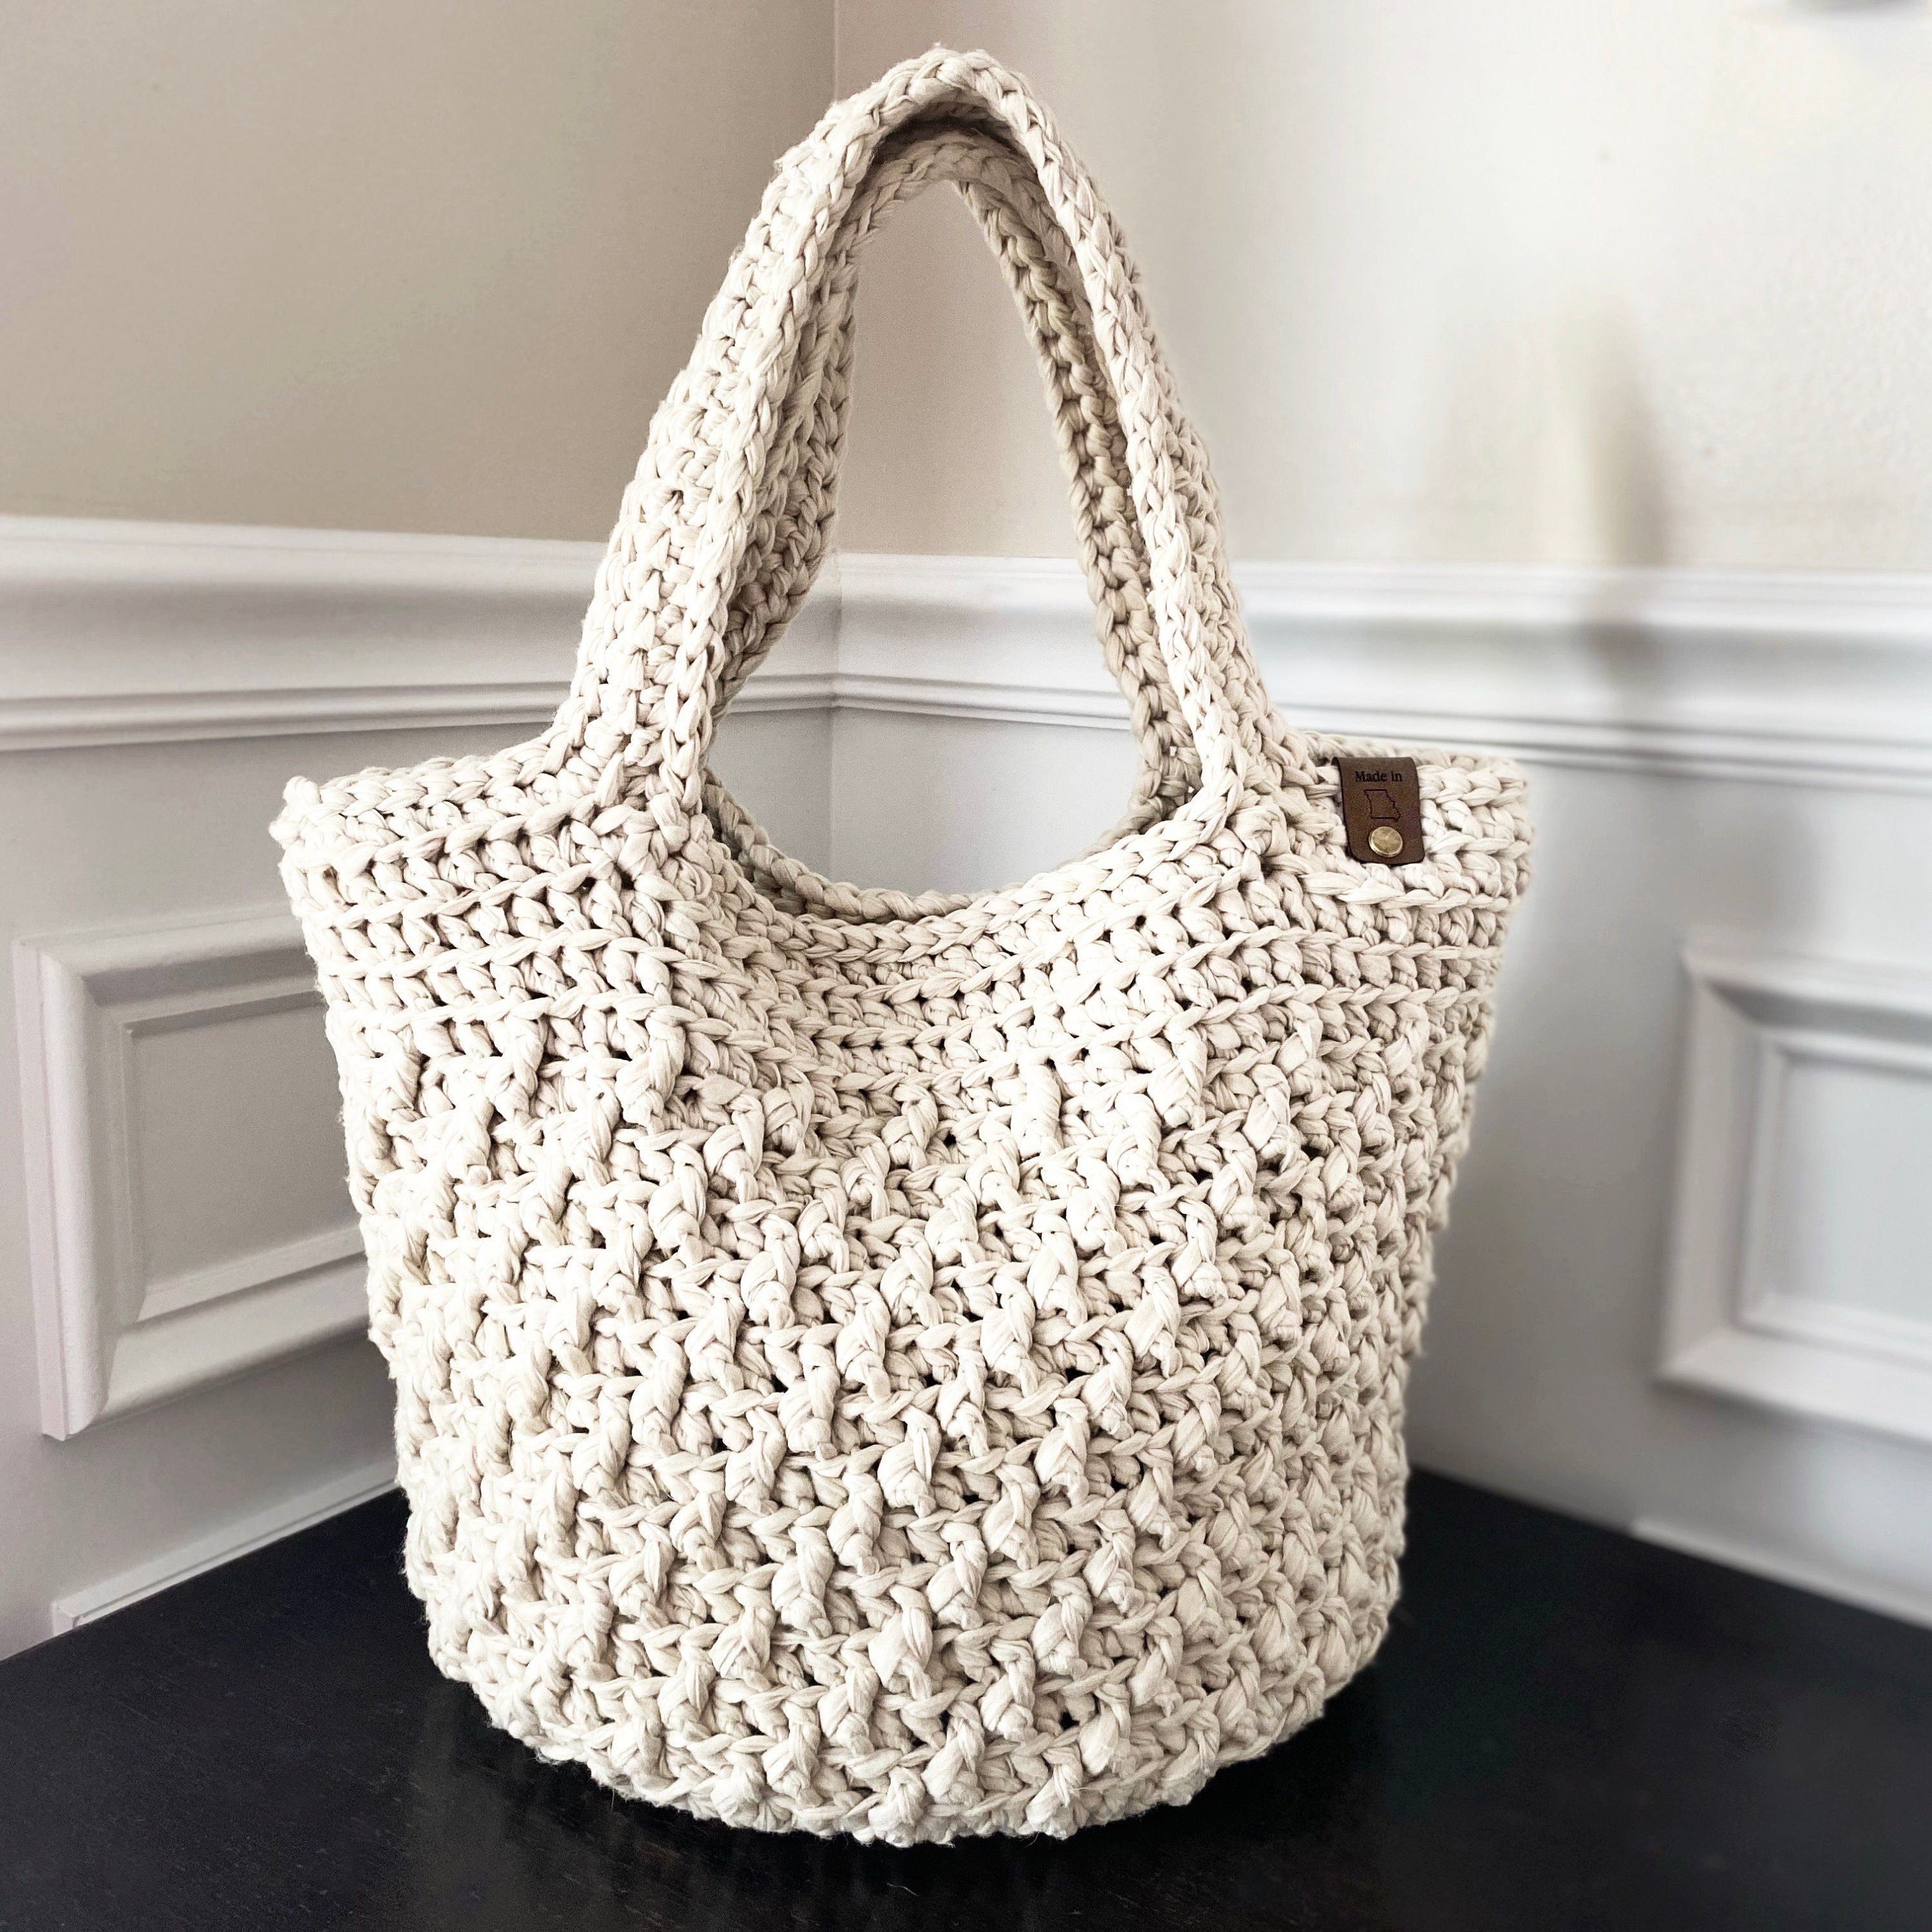 BUY MORE YARN Cotton Tote Bag with Snap Closure